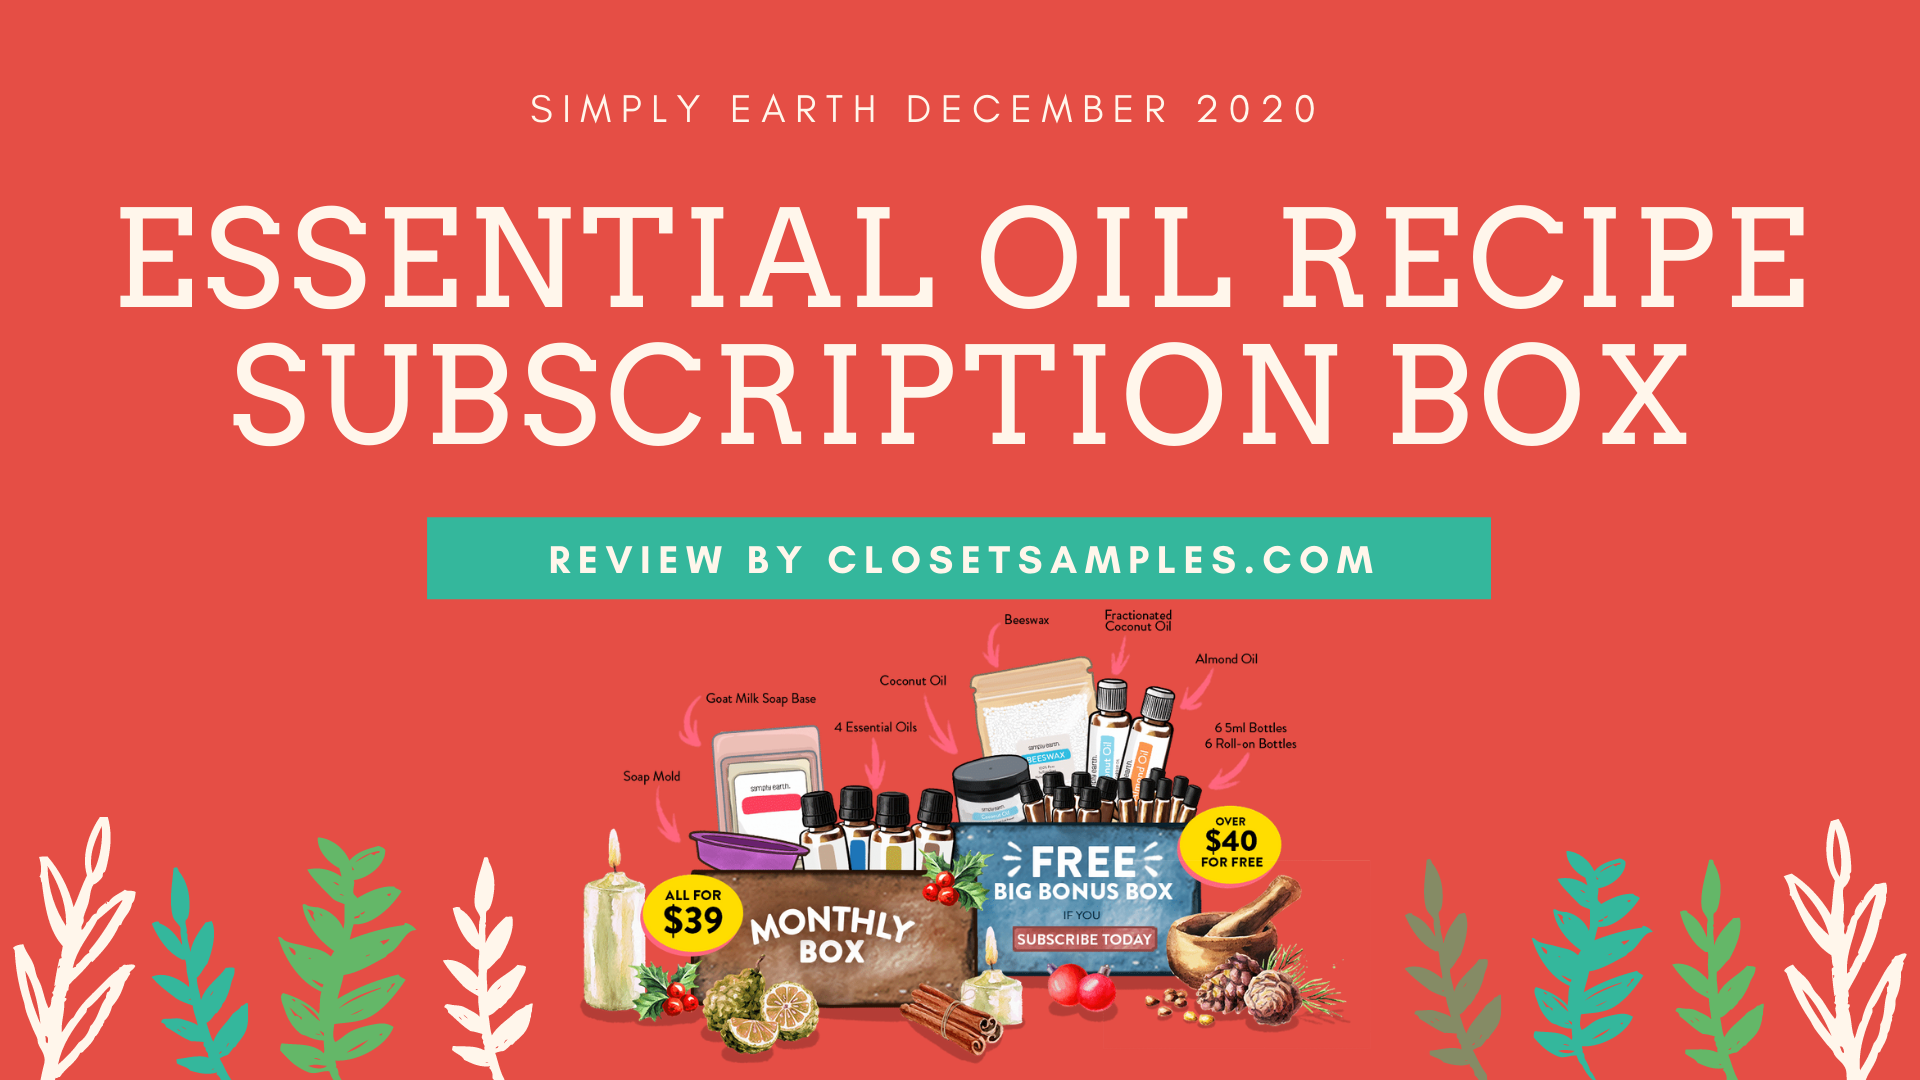 Simply-Earth-December-2020-Essential-Oil-Recipe-Subscription-Box-Review-closetsamples.png